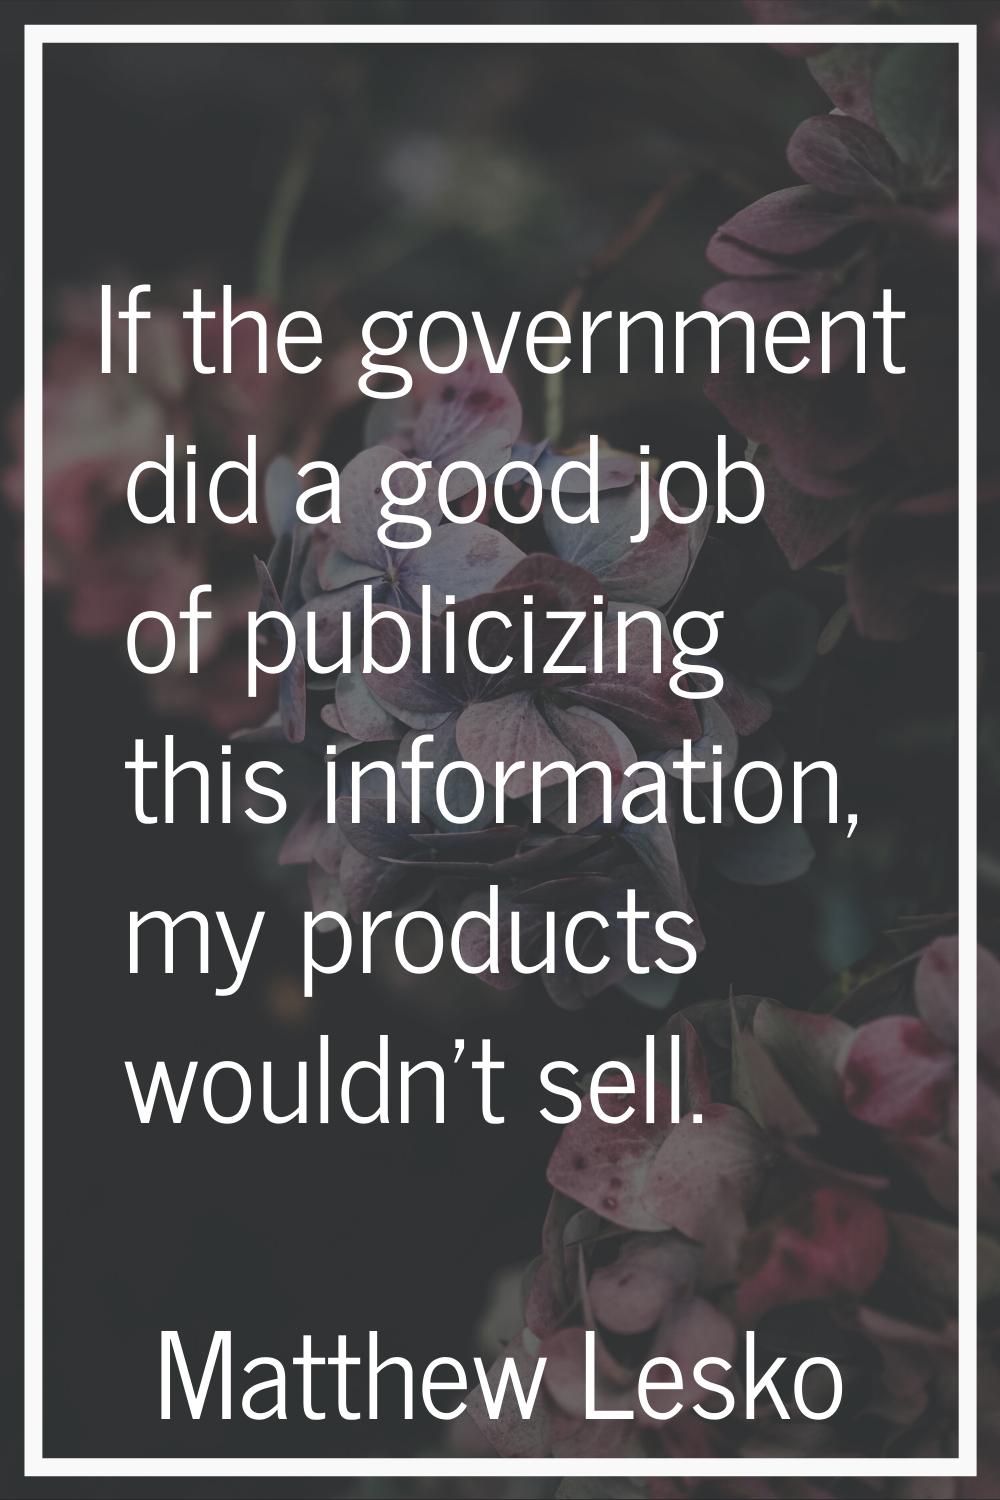 If the government did a good job of publicizing this information, my products wouldn't sell.